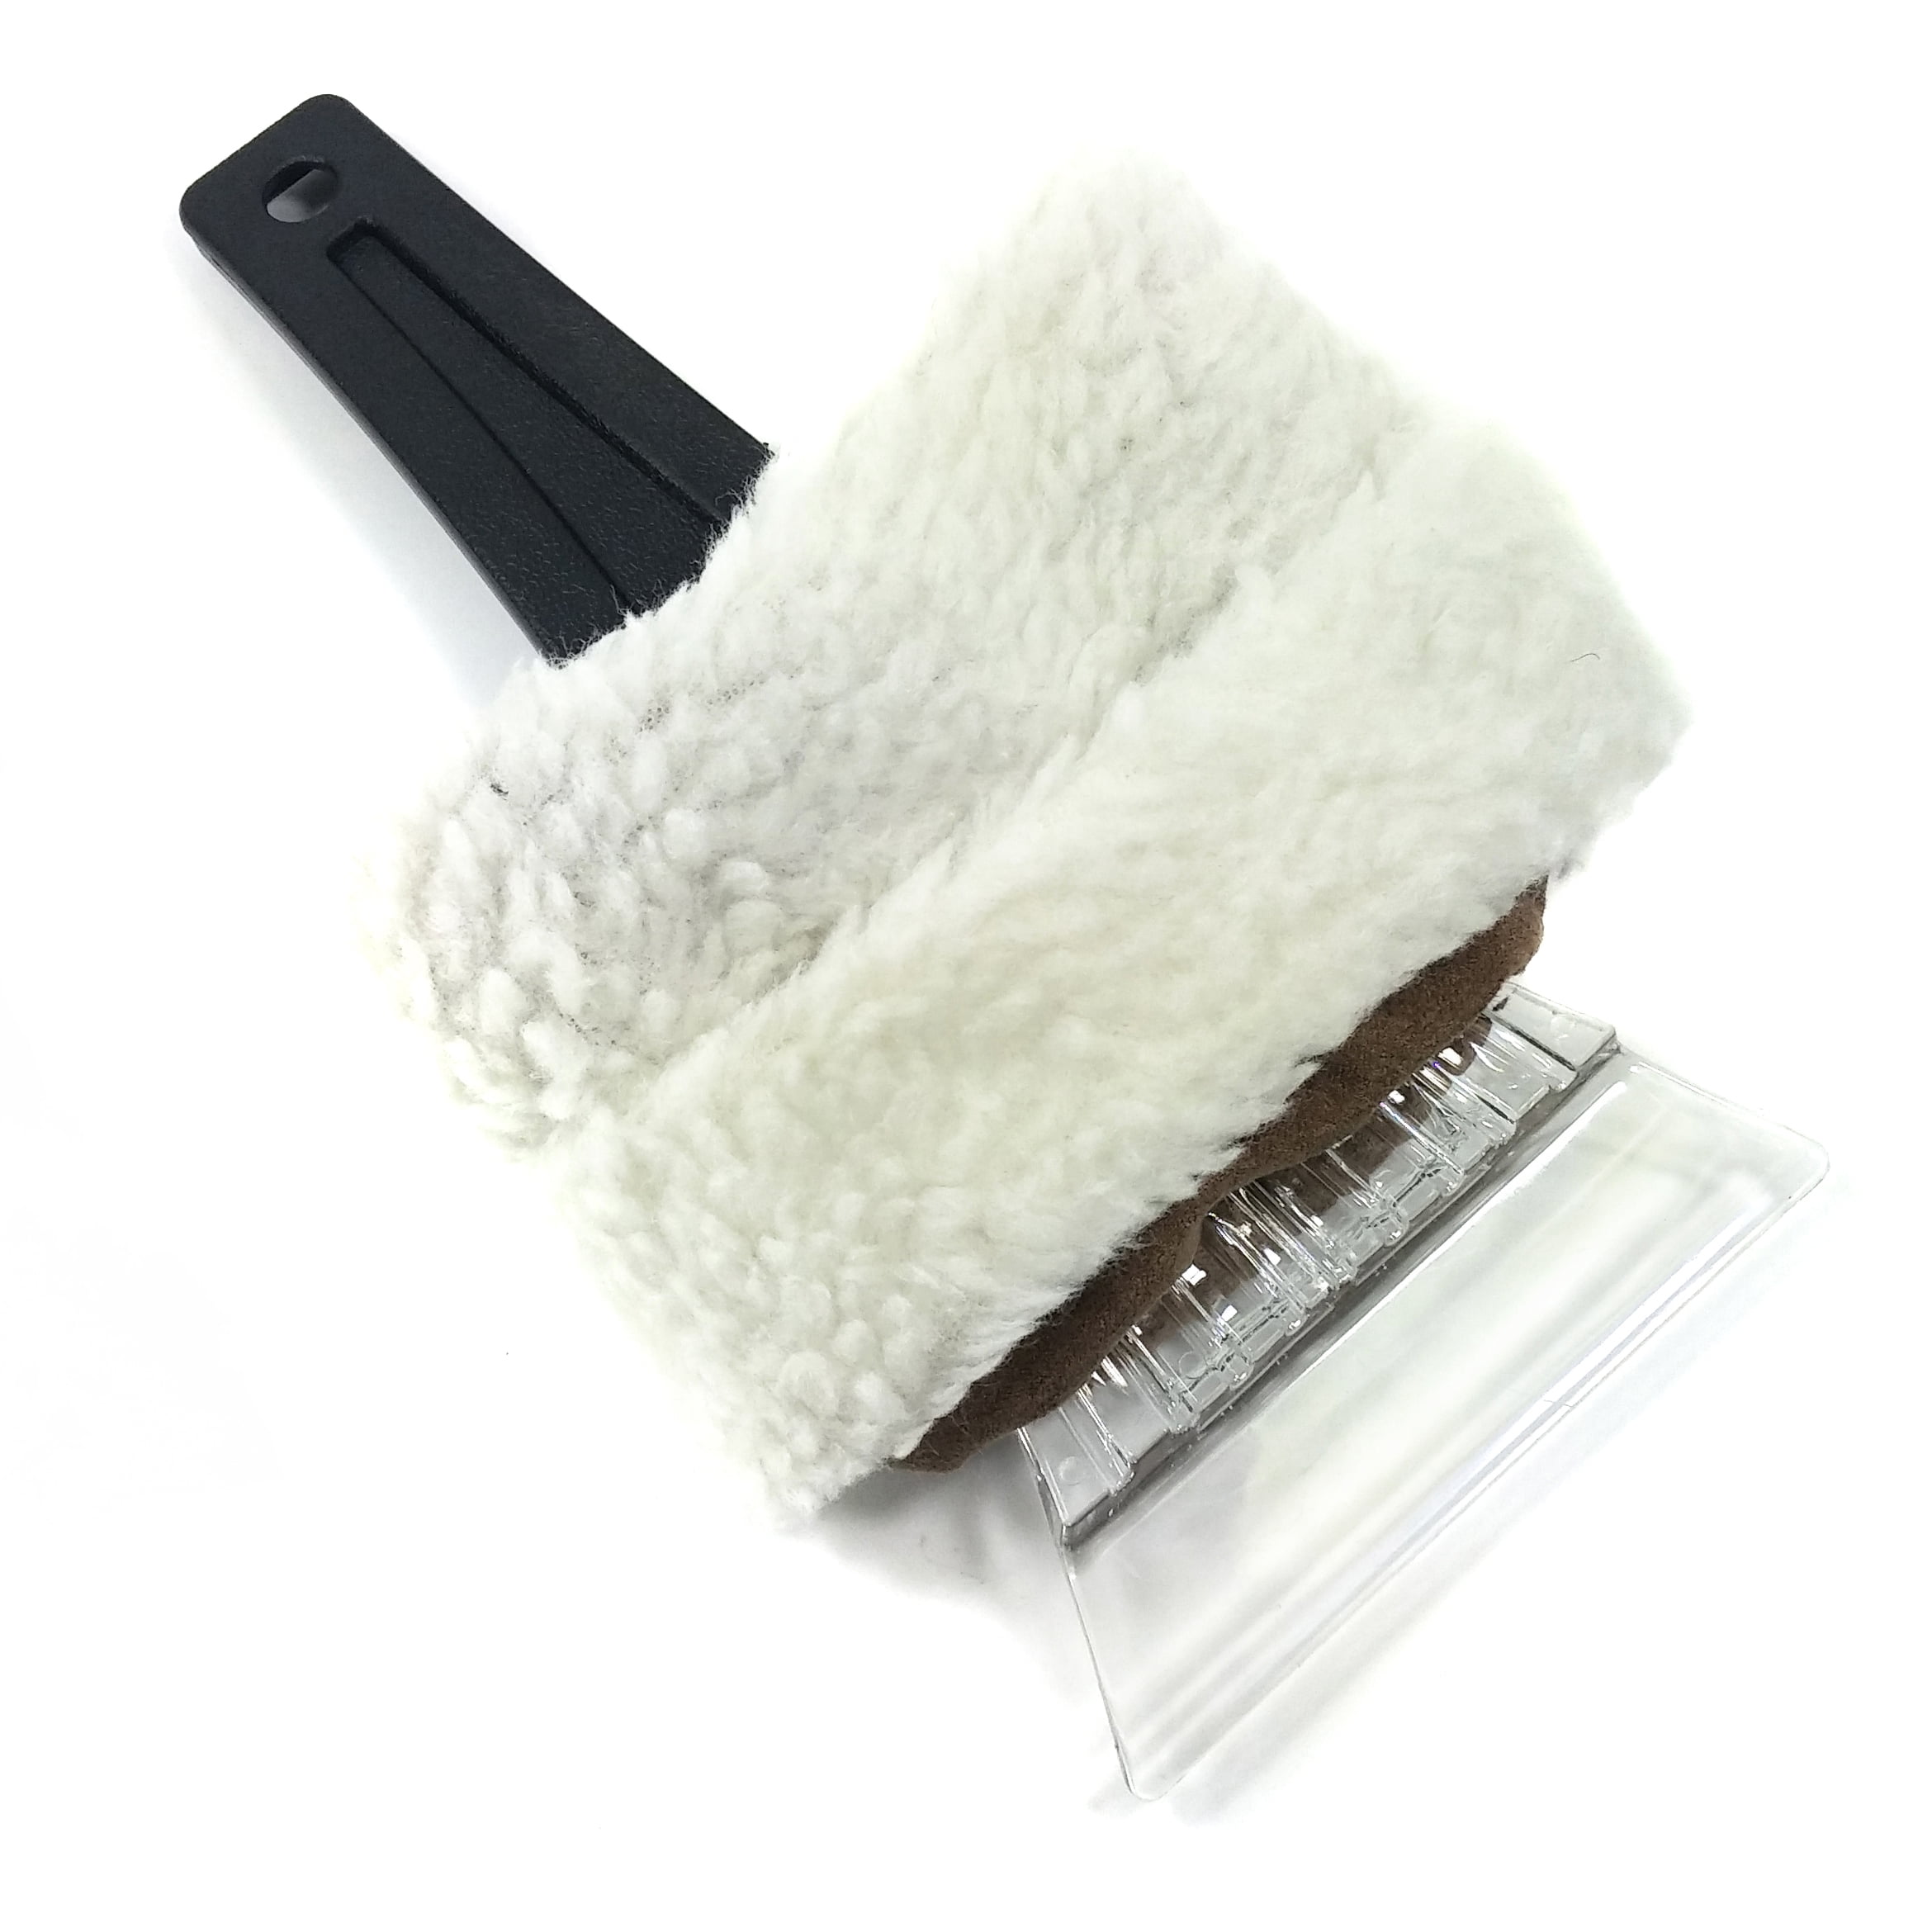 Snow and Ice Scraper with Glove, Windshield Ice Remover by